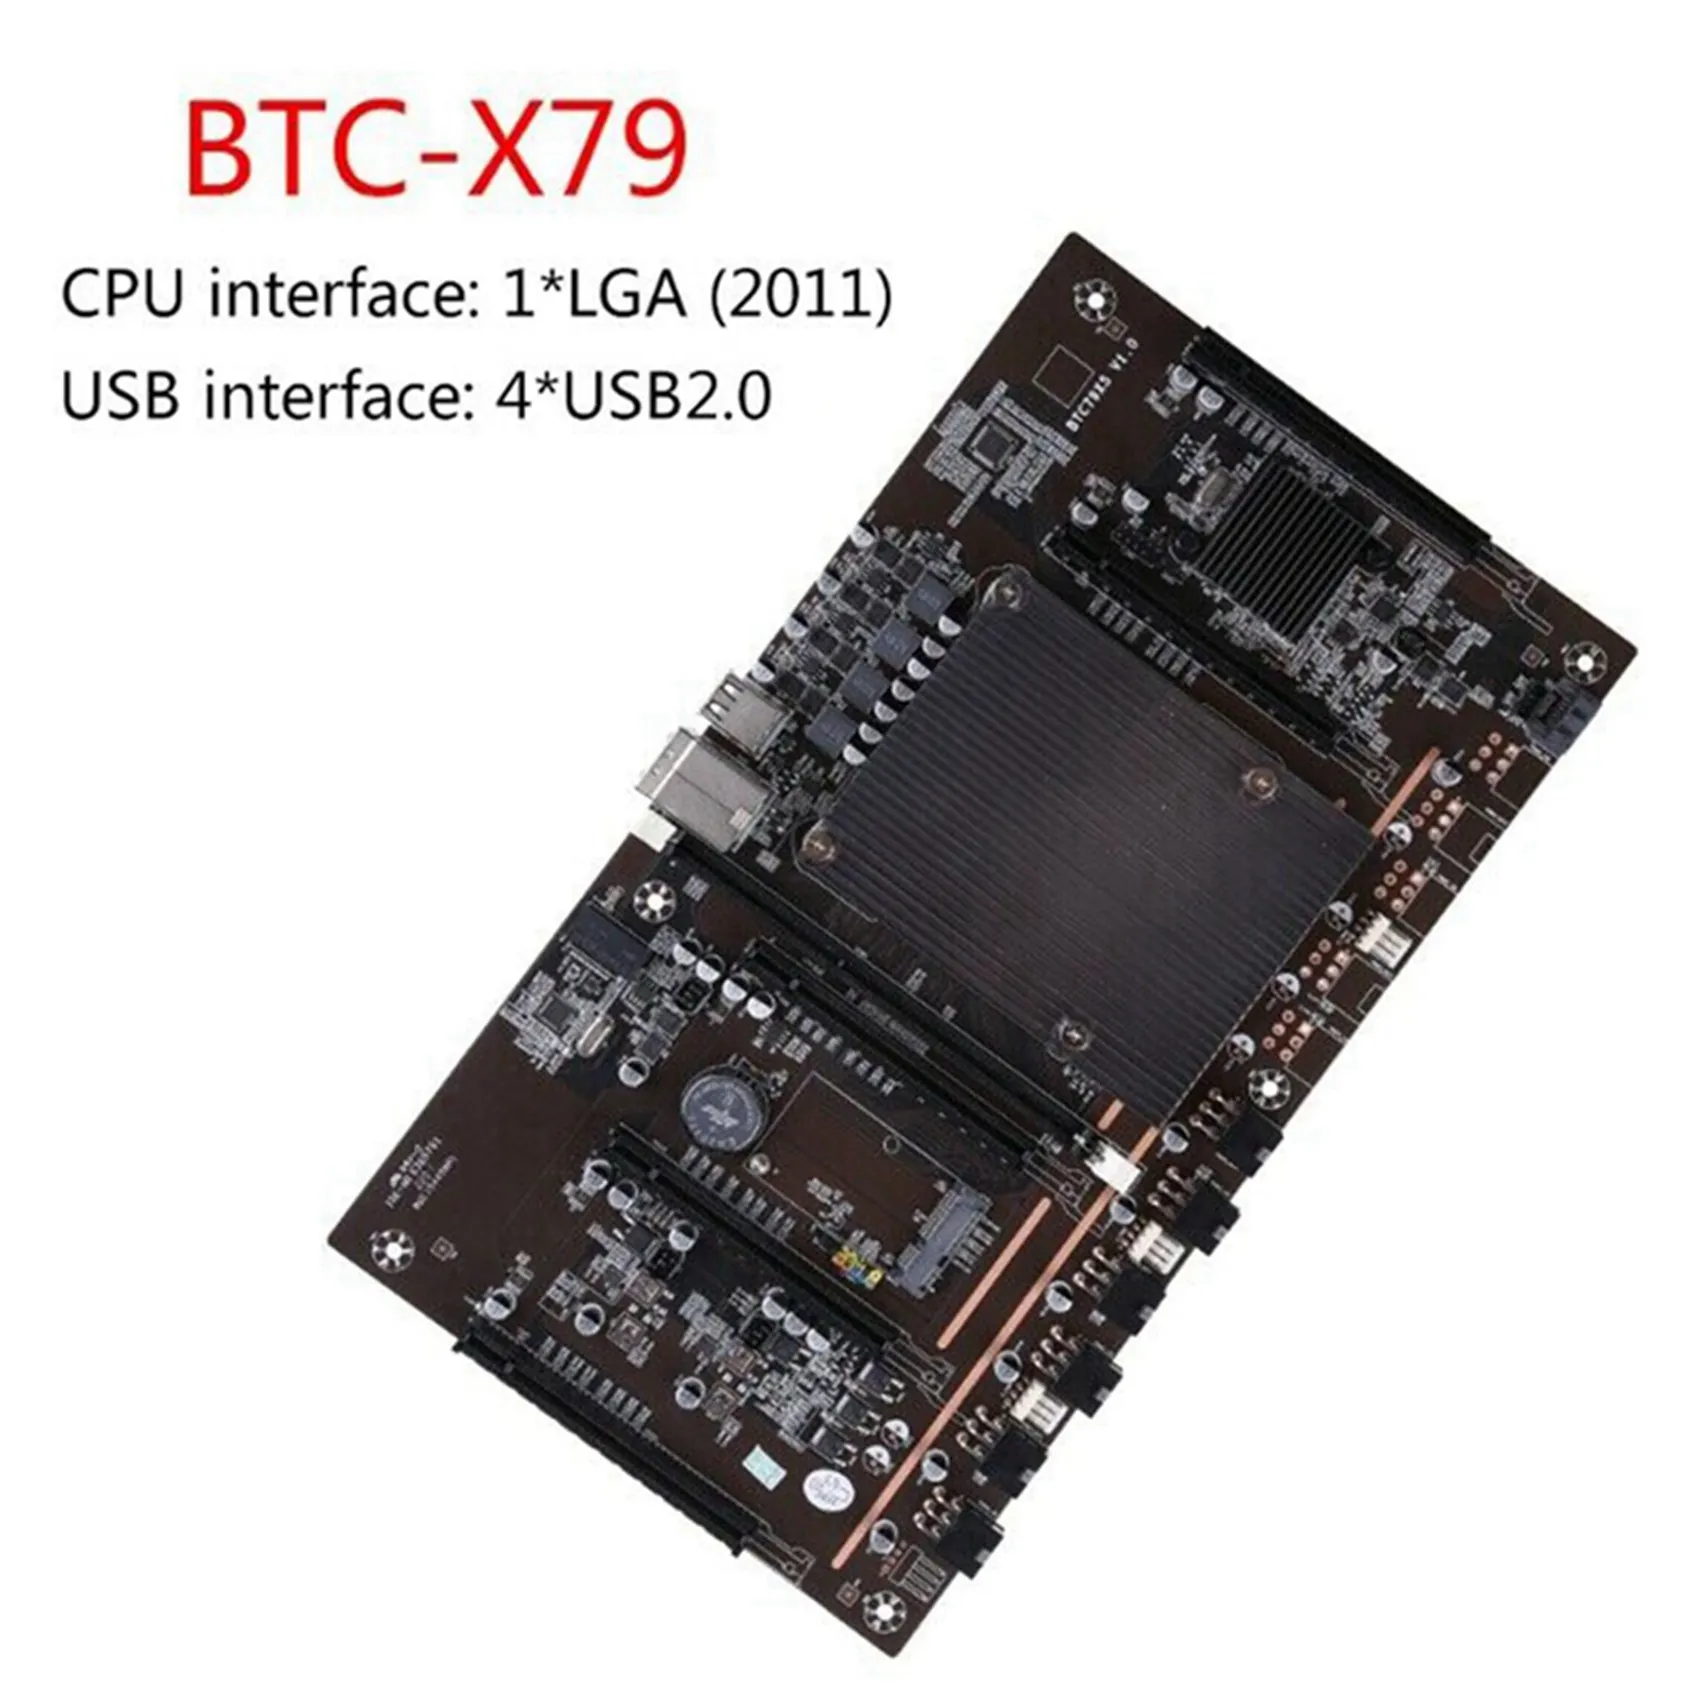 X79 BTC Miner Motherboard with E5 2609 CPU+RECC 4G DDR3 Ram+24 Pins Connector Support 3060 3070 3080 GPU for BTC Mining images - 6